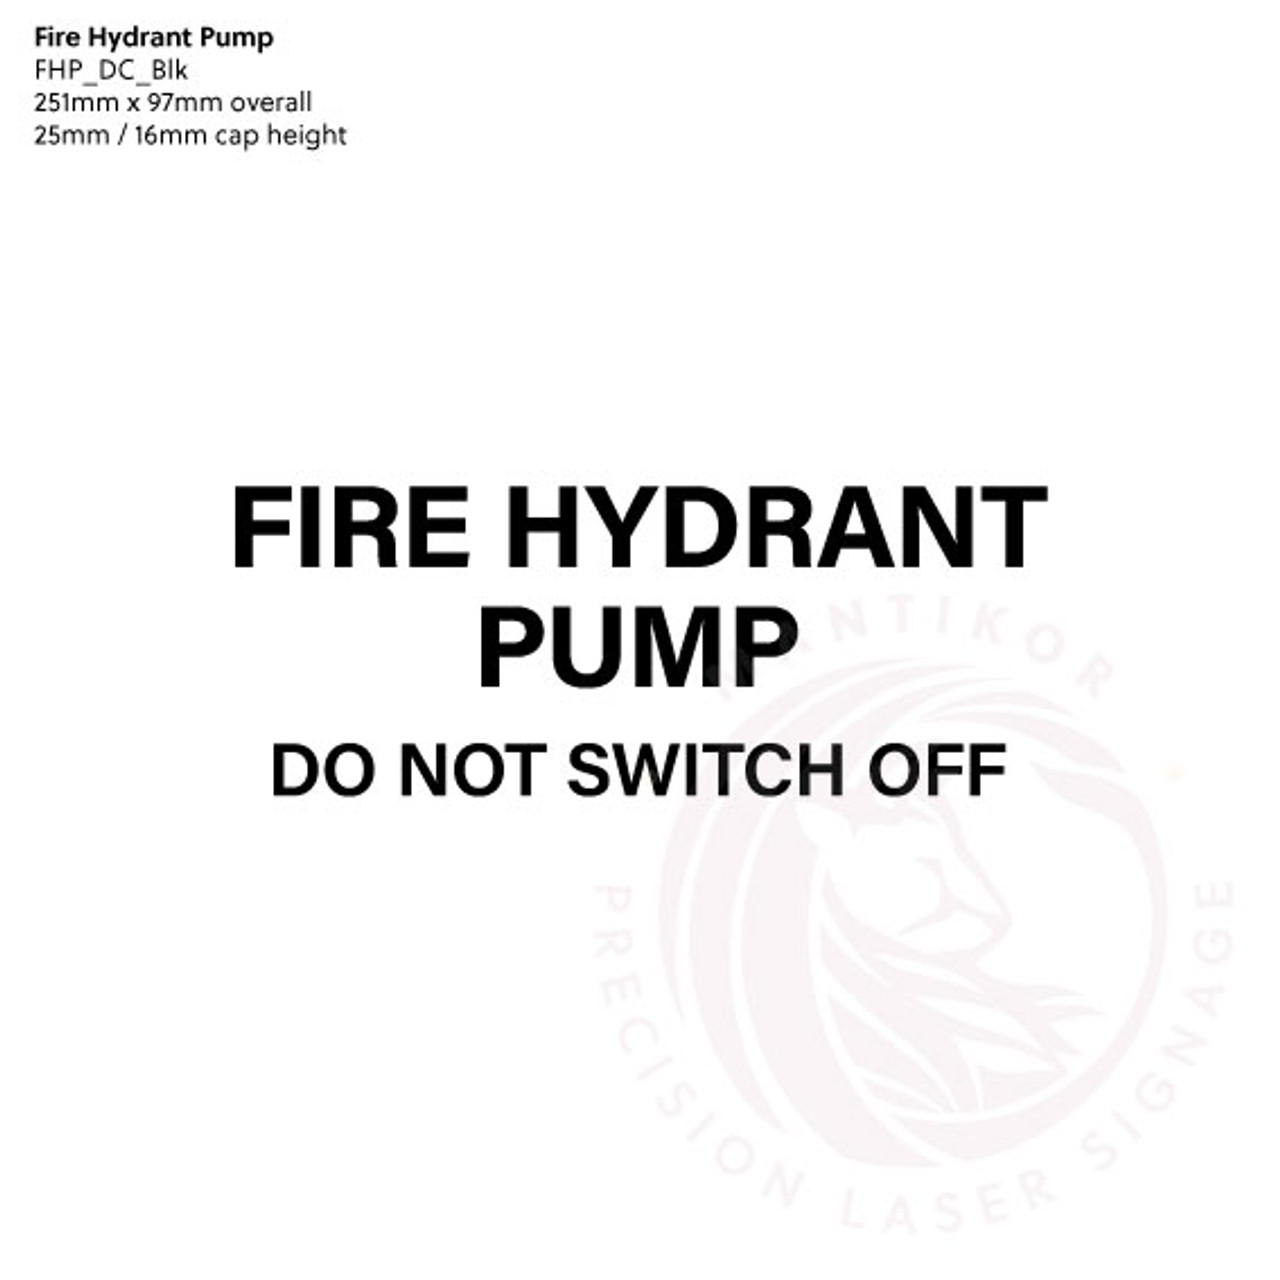 Fire Hydrant Pump | Do Not Switch Off Black Decal - Standard fire statutory sign, compliant with the Building Code of Australia requirements.